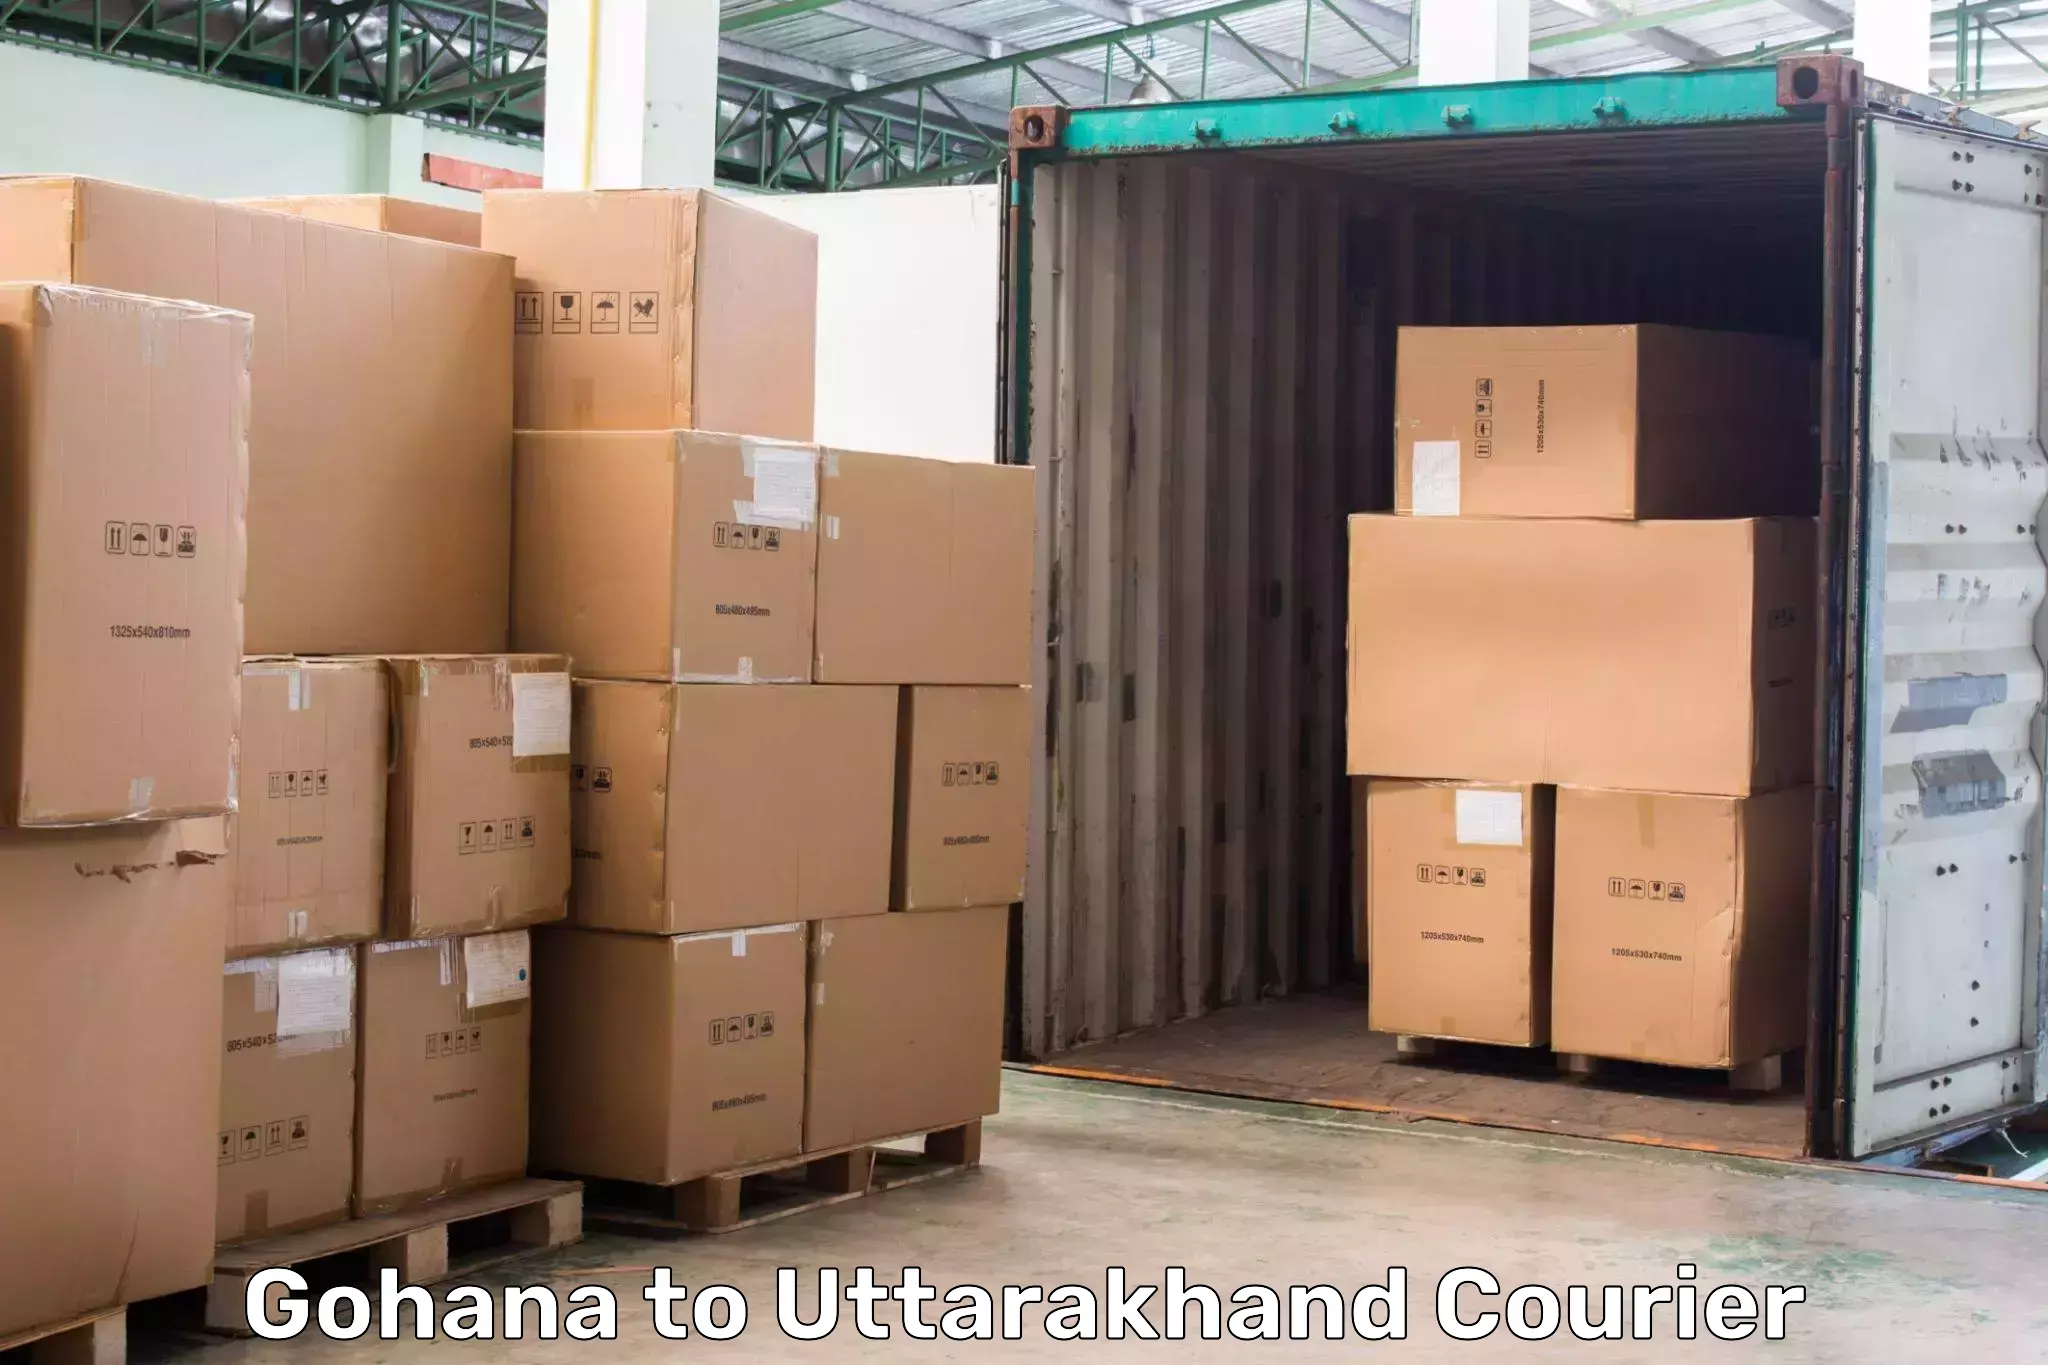 Express package services Gohana to Lansdowne